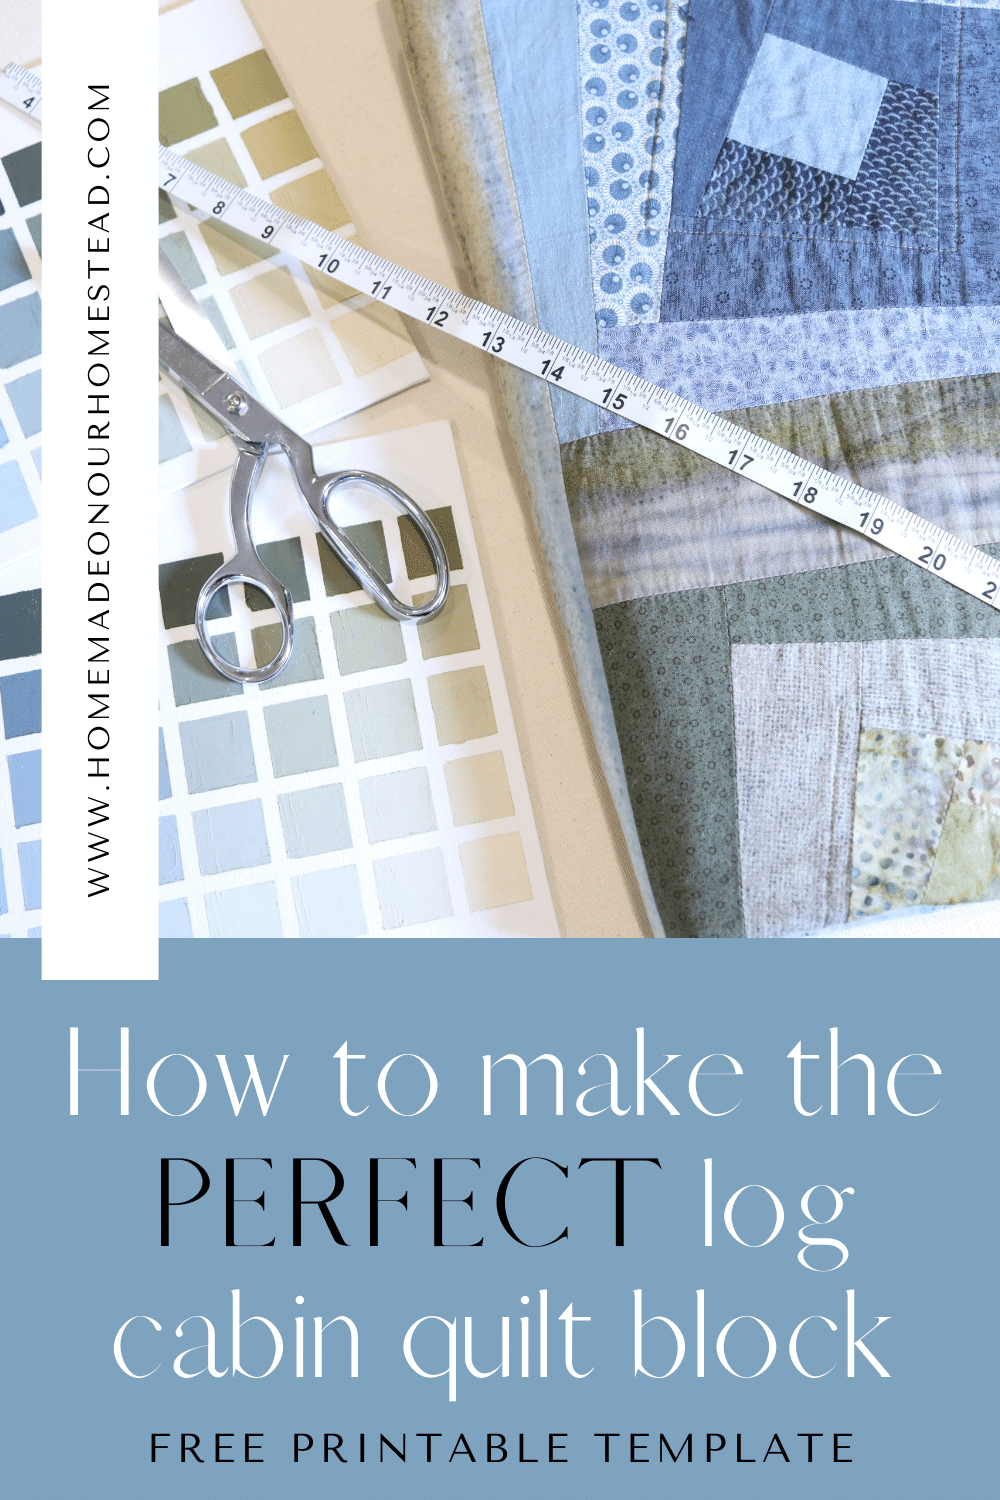 How To Sew Quilt Blocks Together